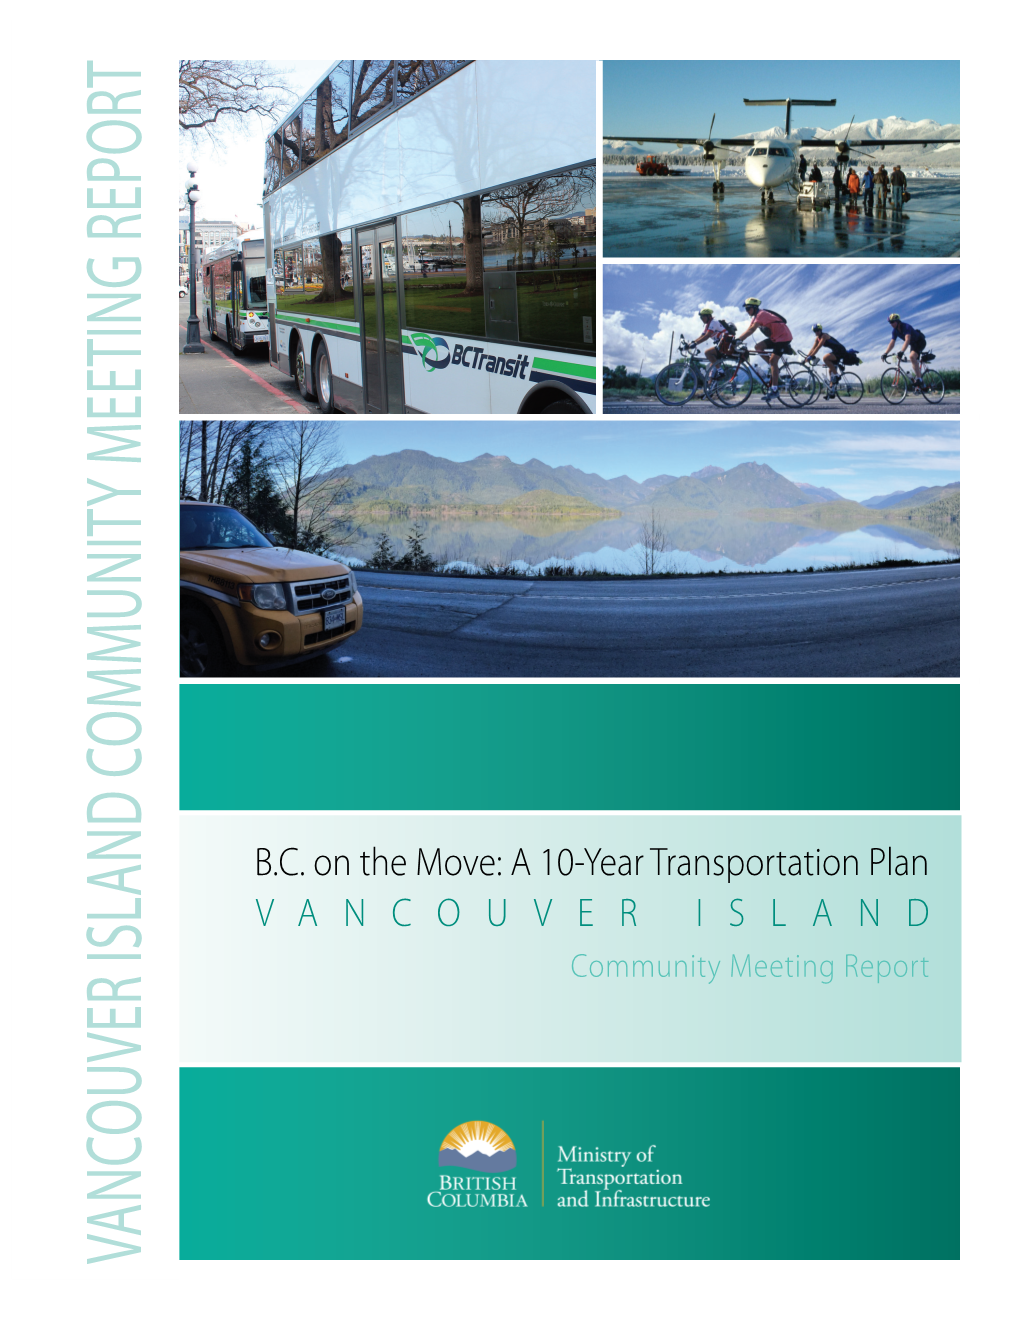 A 10-Year Transportation Plan, Vancouver Island Community Meeting Report